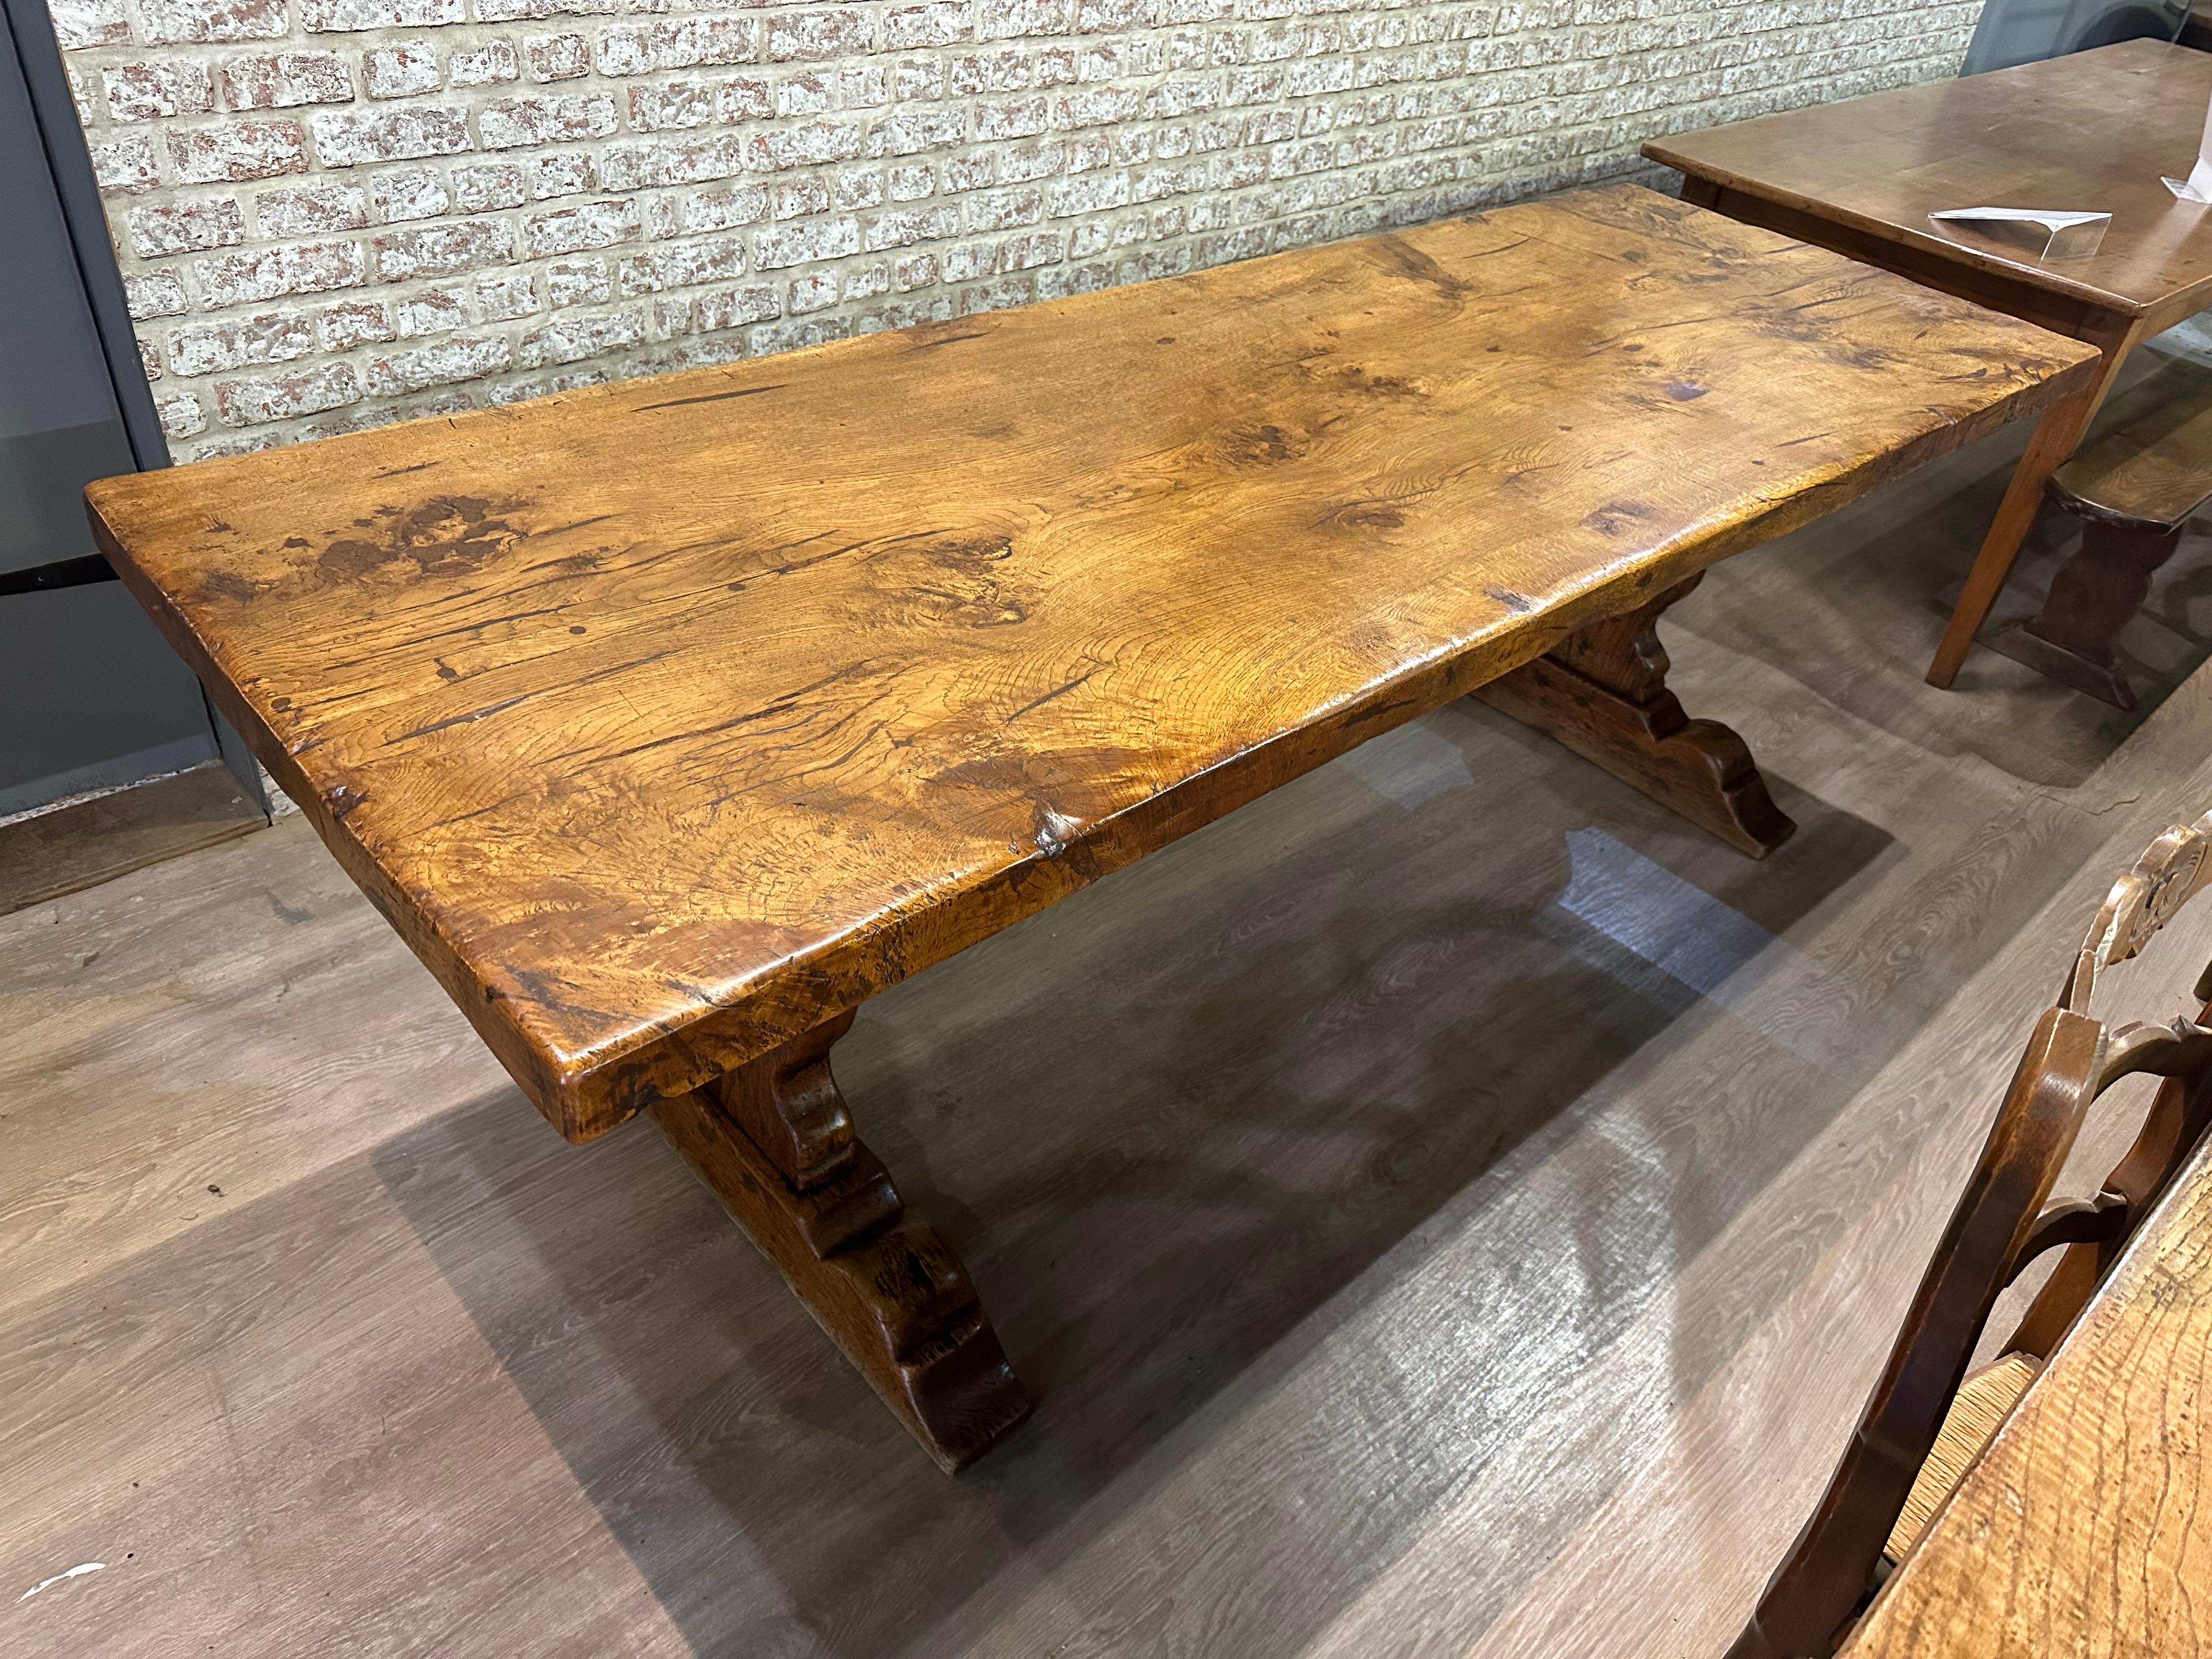 The antique oak single plank top trestle table is a stunning piece with a rich history. Its remarkable patination and colour add to its charm and character. The table features a rare single plank top that showcases beautiful figuration, adding a